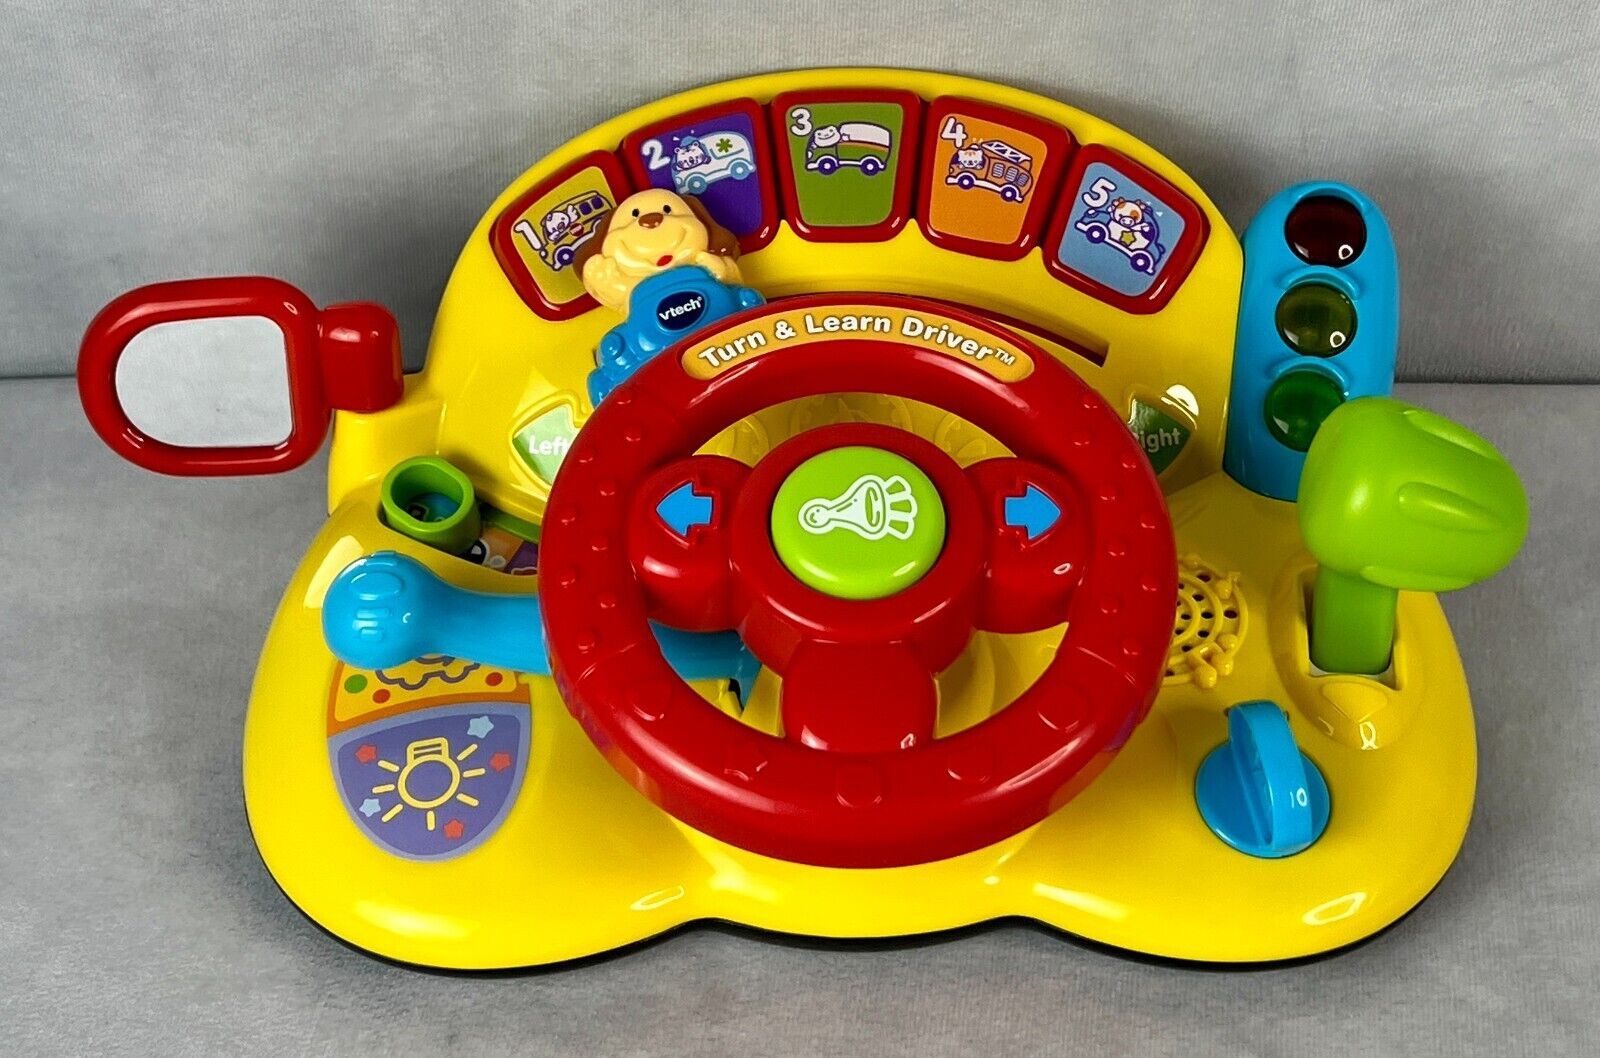 Vtech 80-166601 Turn and Learn Driver Toy - Yellow, Tested, Works Great, Video - $13.60